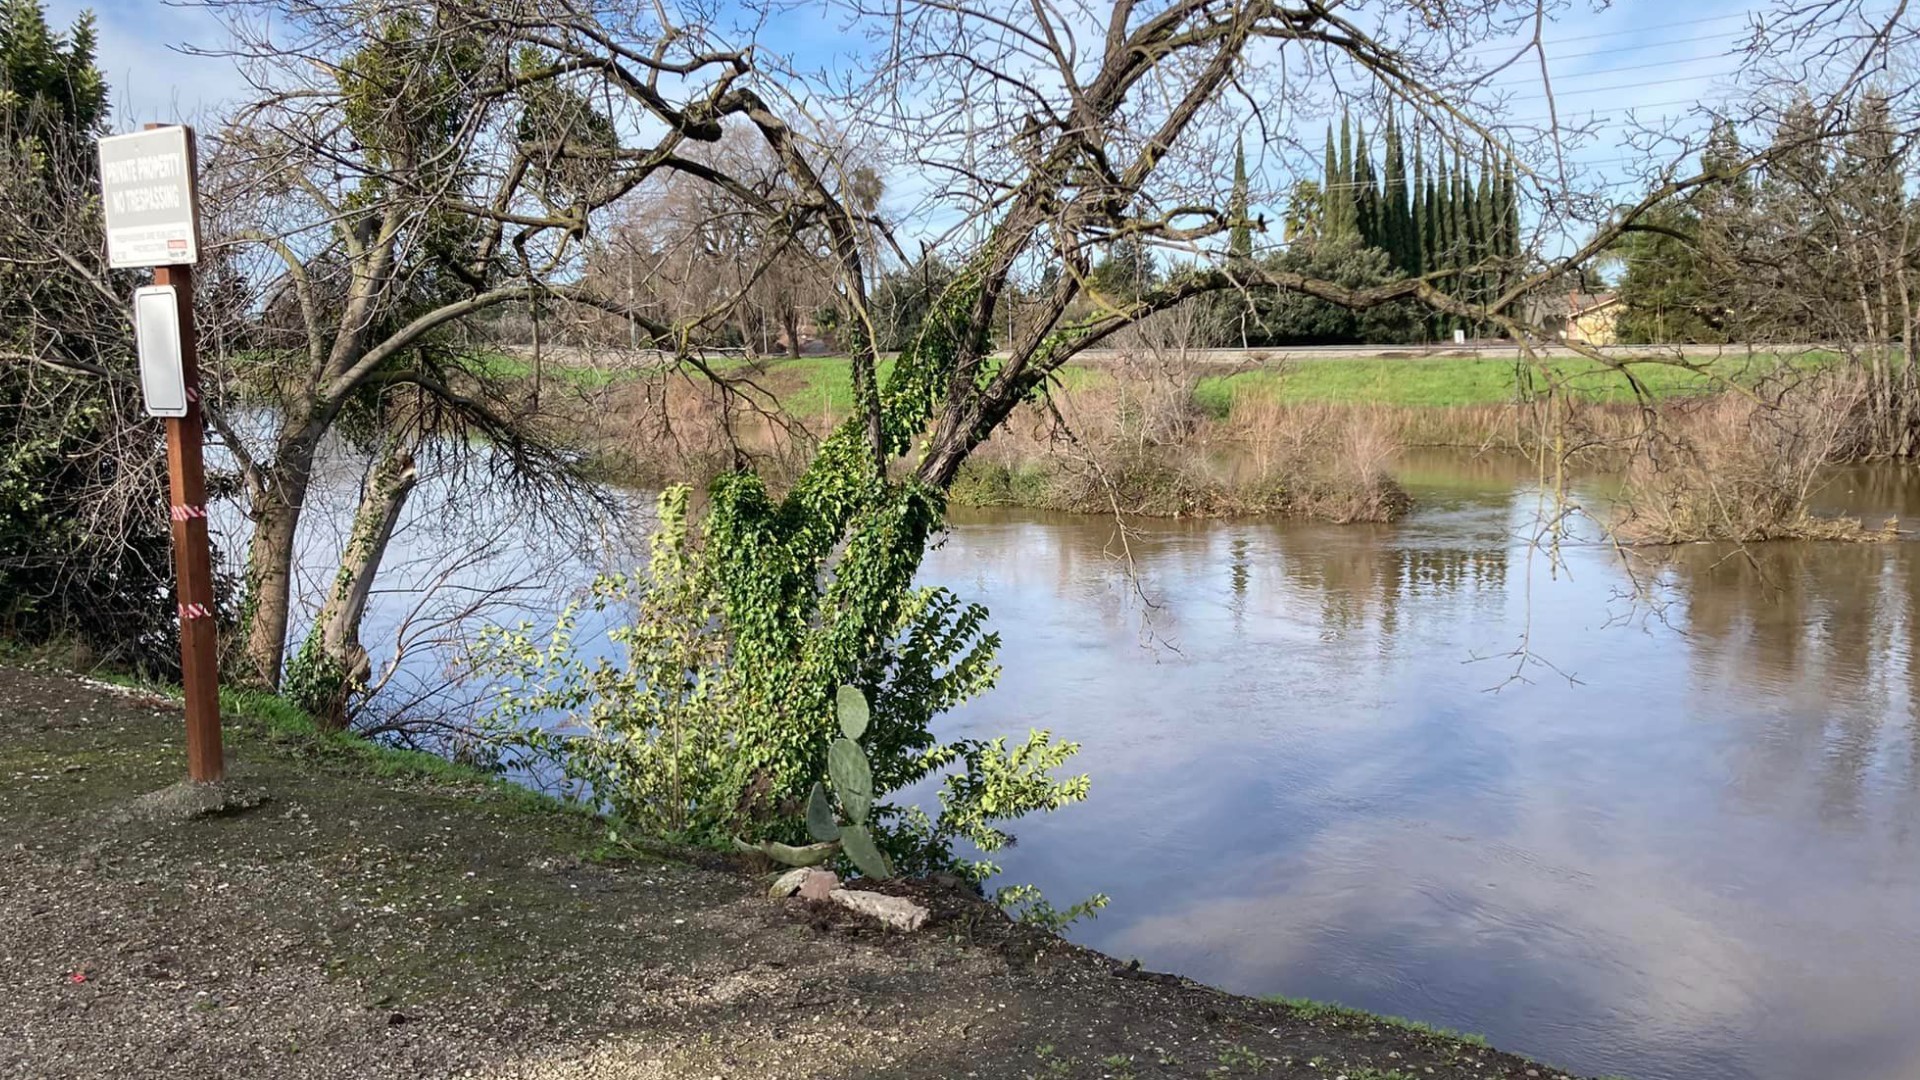 The normally calm Calaveras River under Pacific Avenue has also risen to levels not seen in years thanks to a historic series of atmospheric river storms.